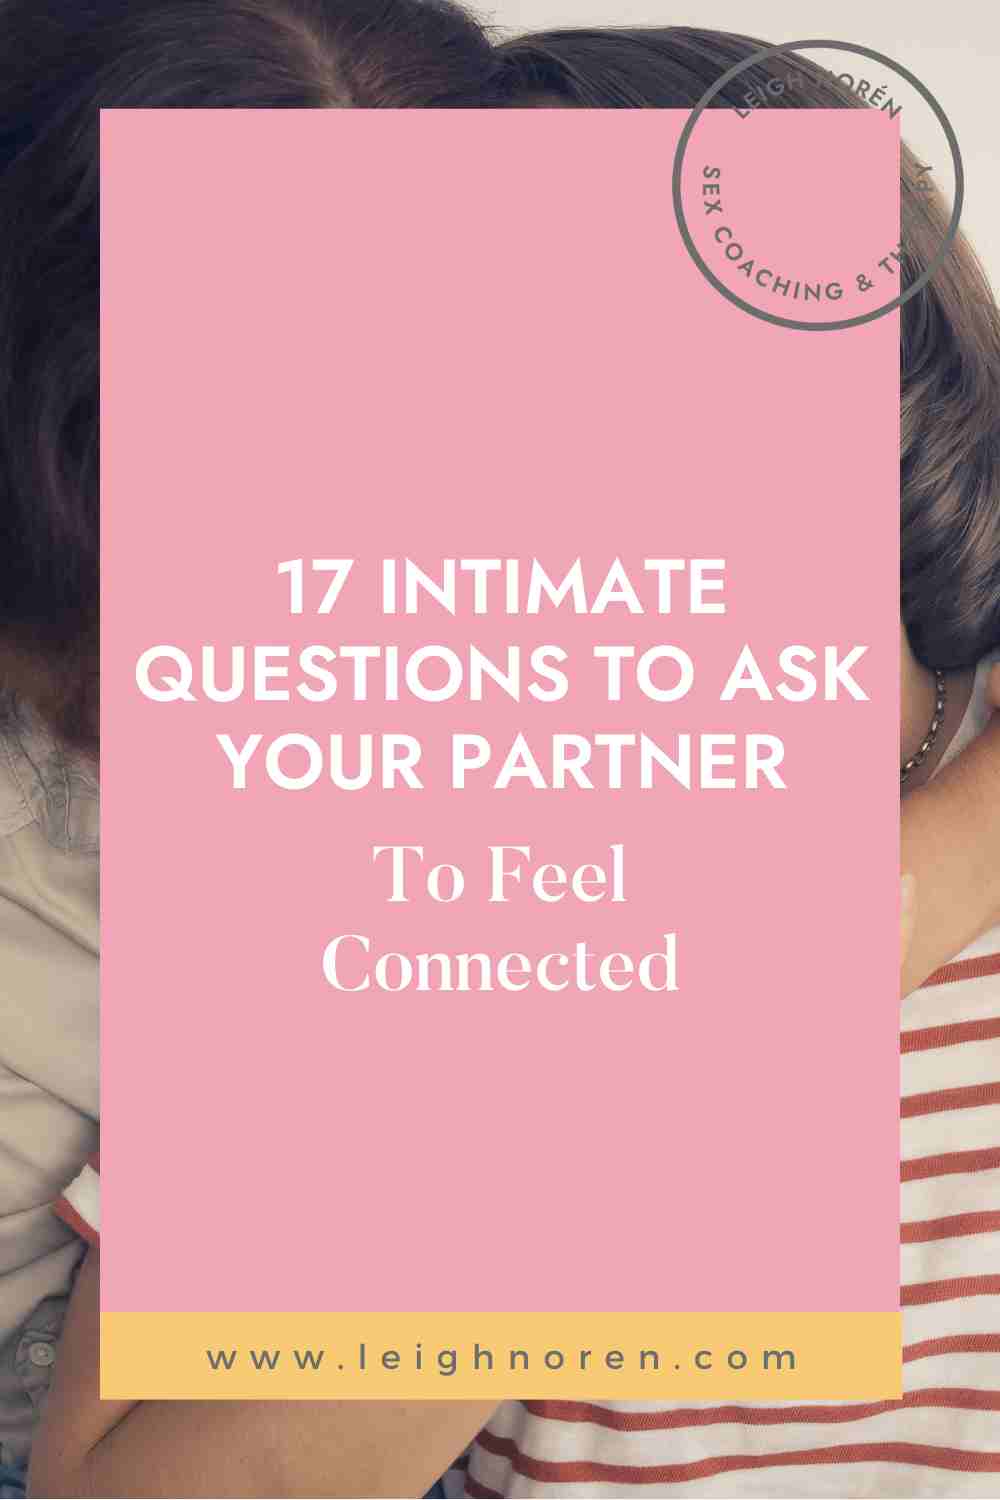 17 intimate questions to ask your partner to feel connected